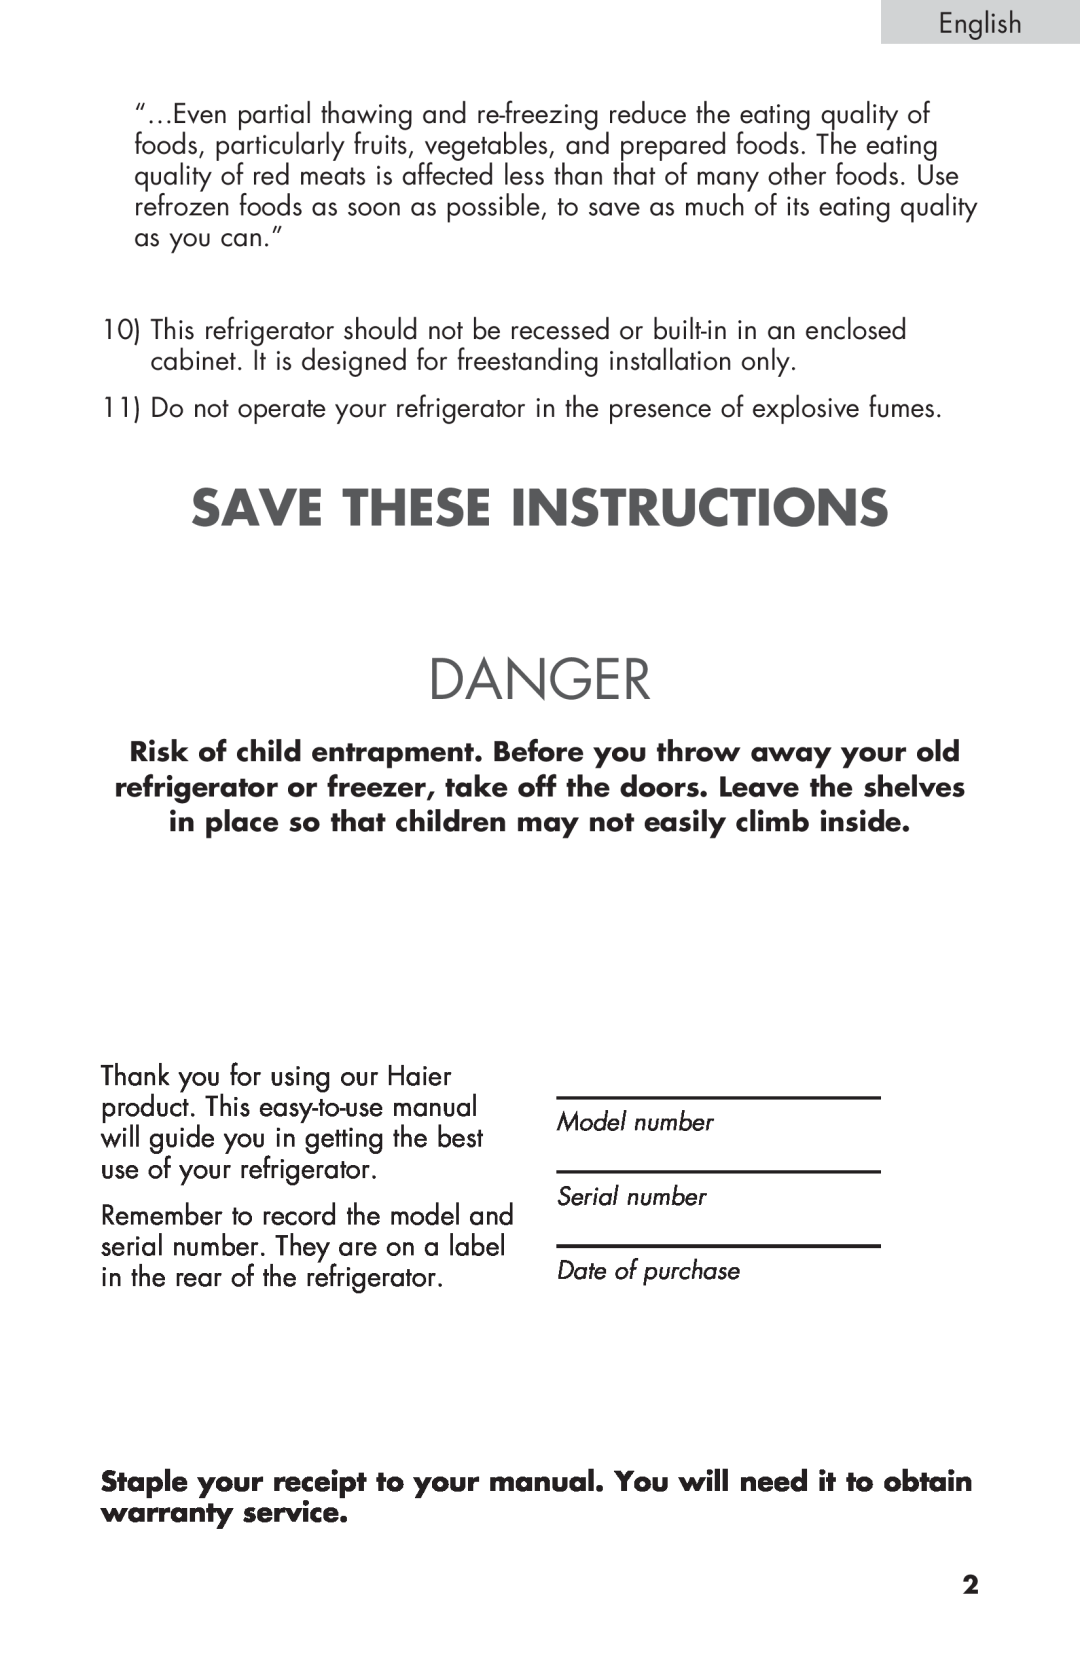 Haier HNSE032, COMPACT REFRIGERATOR manual Save These Instructions, Danger 